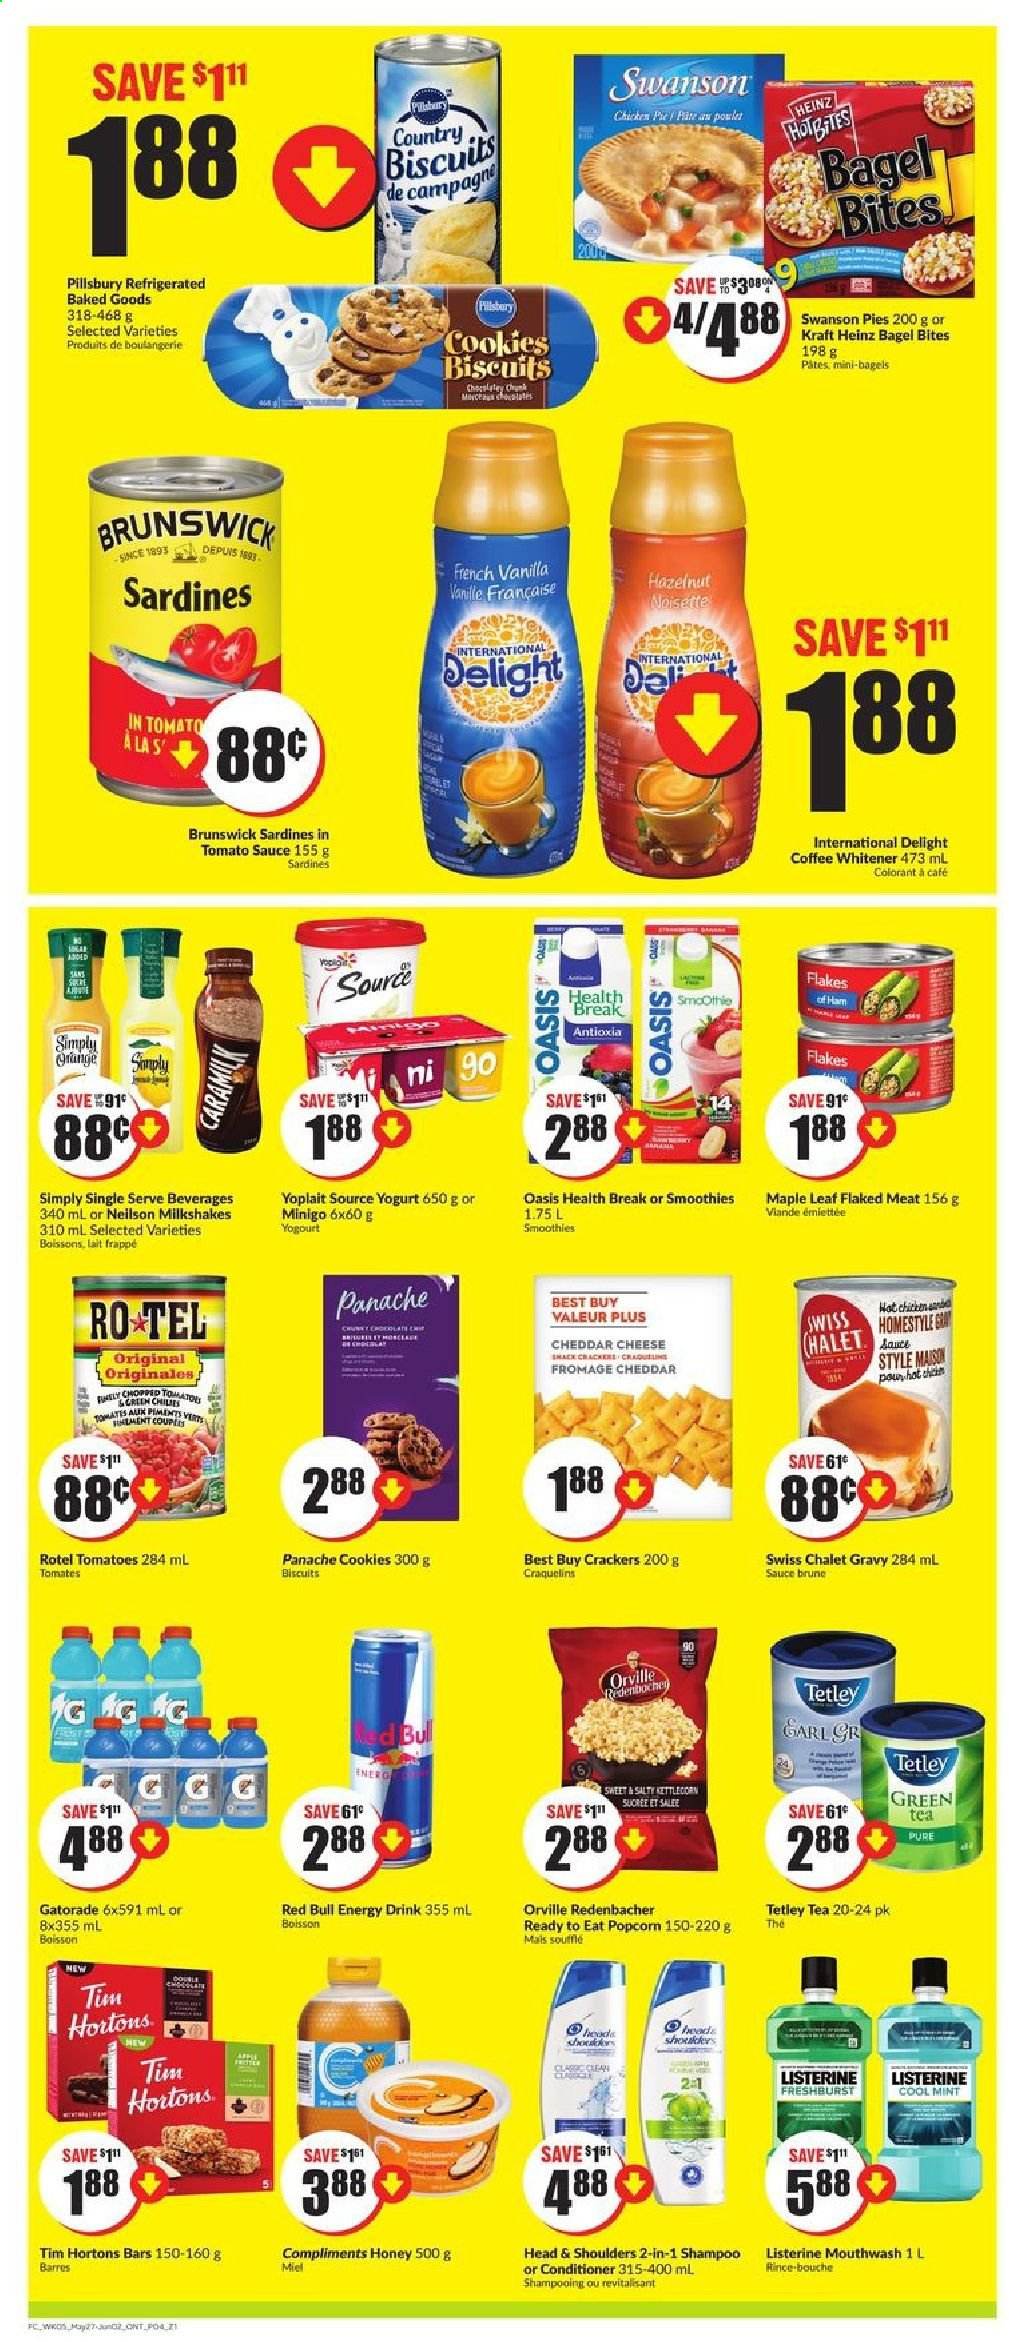 thumbnail - Circulaire FreshCo. - 27 Mai 2021 - 02 Juin 2021 - Produits soldés - pâtes, fromage, biscuits, cookies, crackers, Oasis, Head & Shoulders, sardines, Listerine. Page 4.